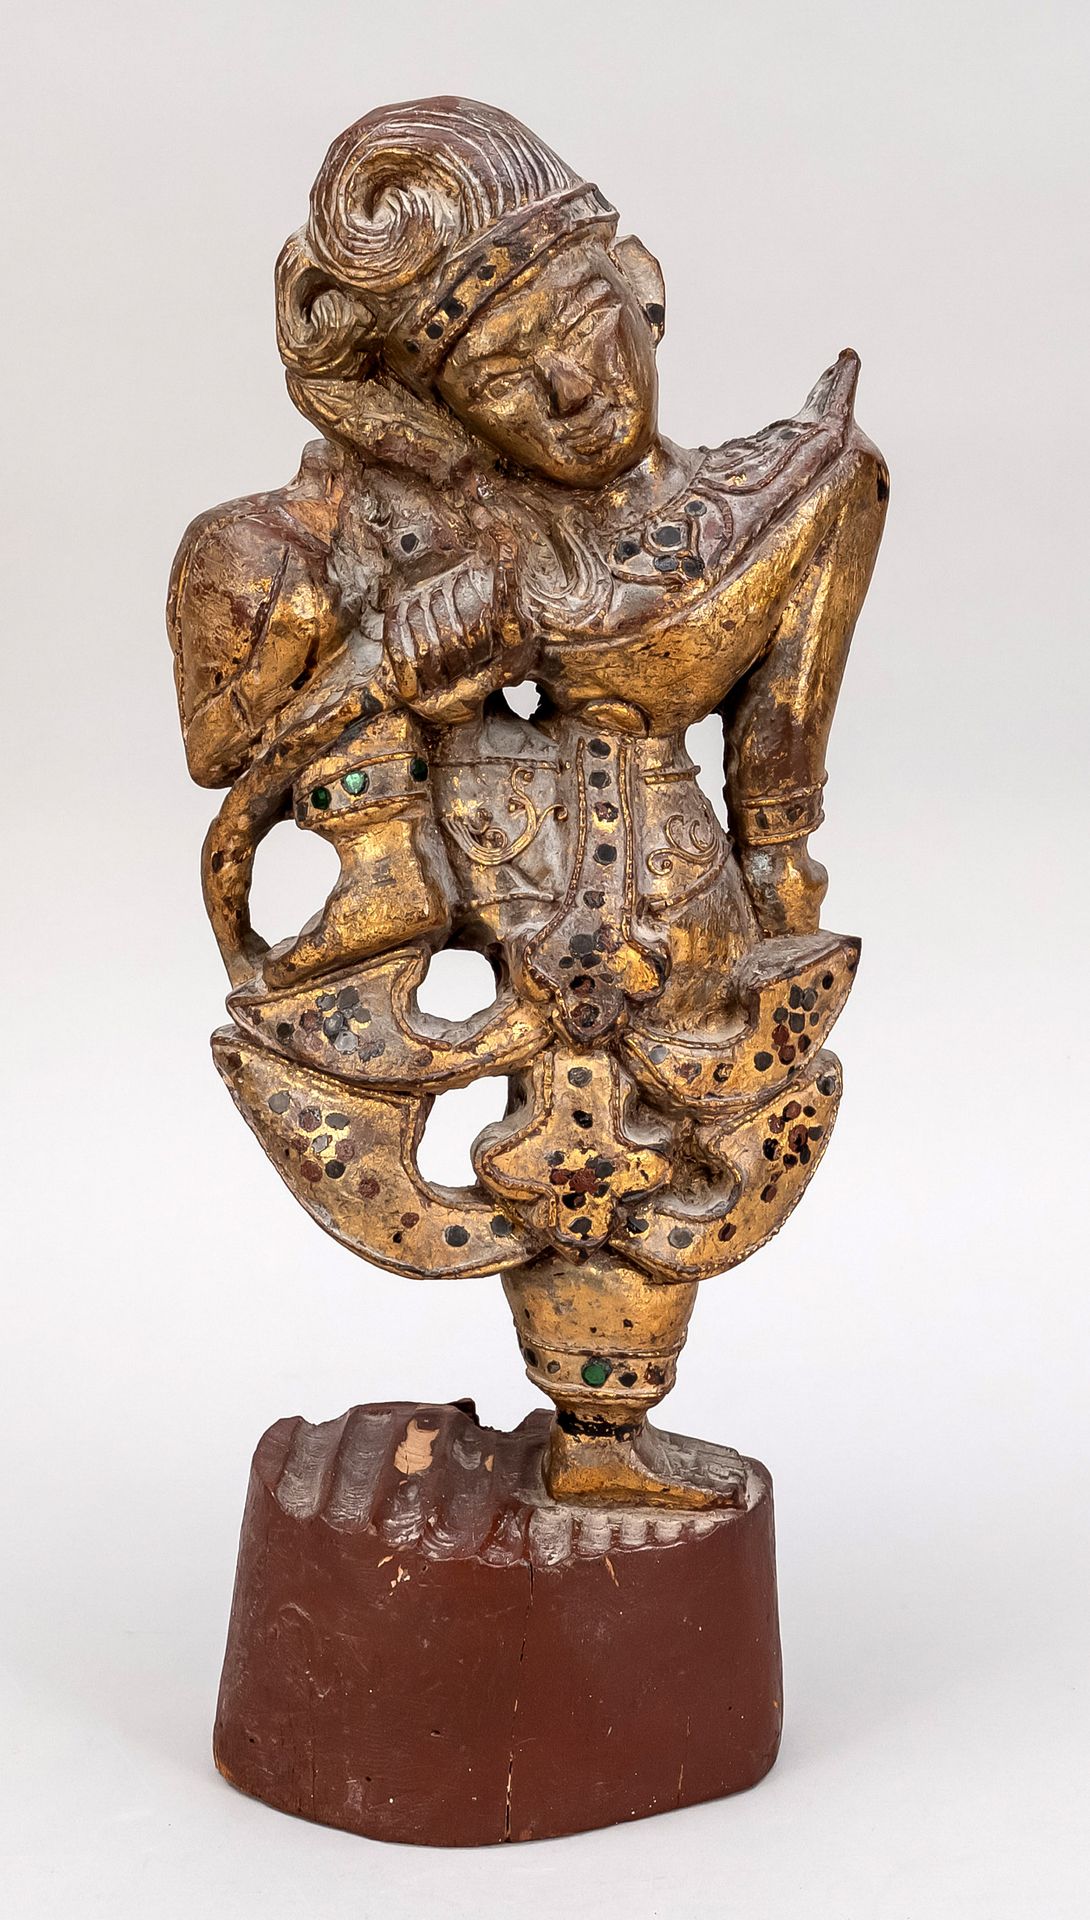 Null Wooden figure, Indonesia, 1st half of 20th century, wood, gold decorated an&hellip;